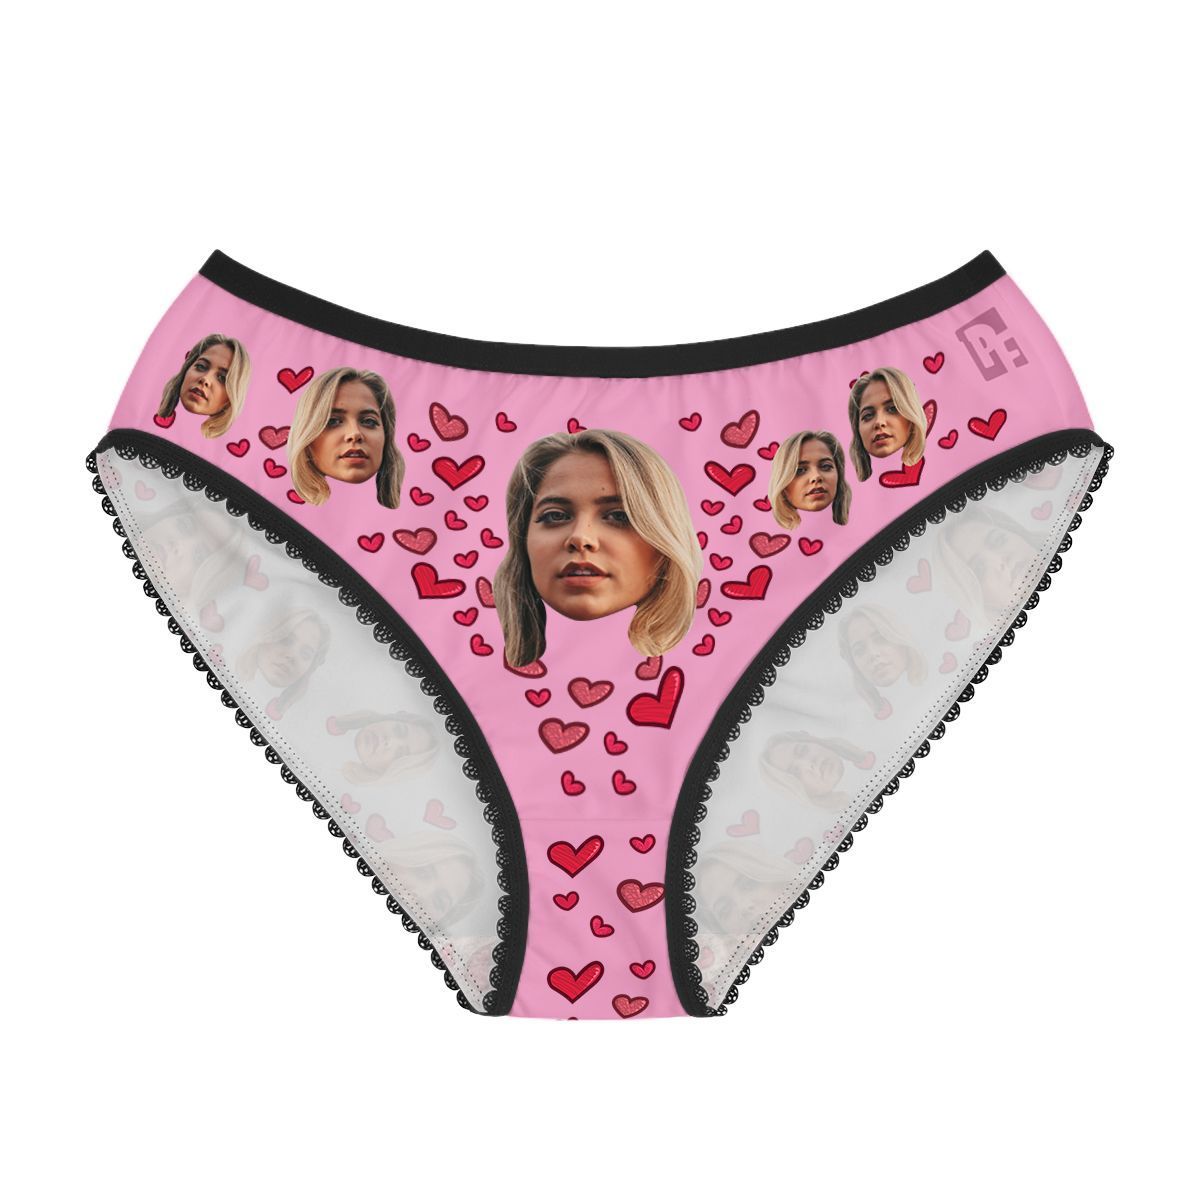 Red Heart women's underwear briefs personalized with photo printed on them